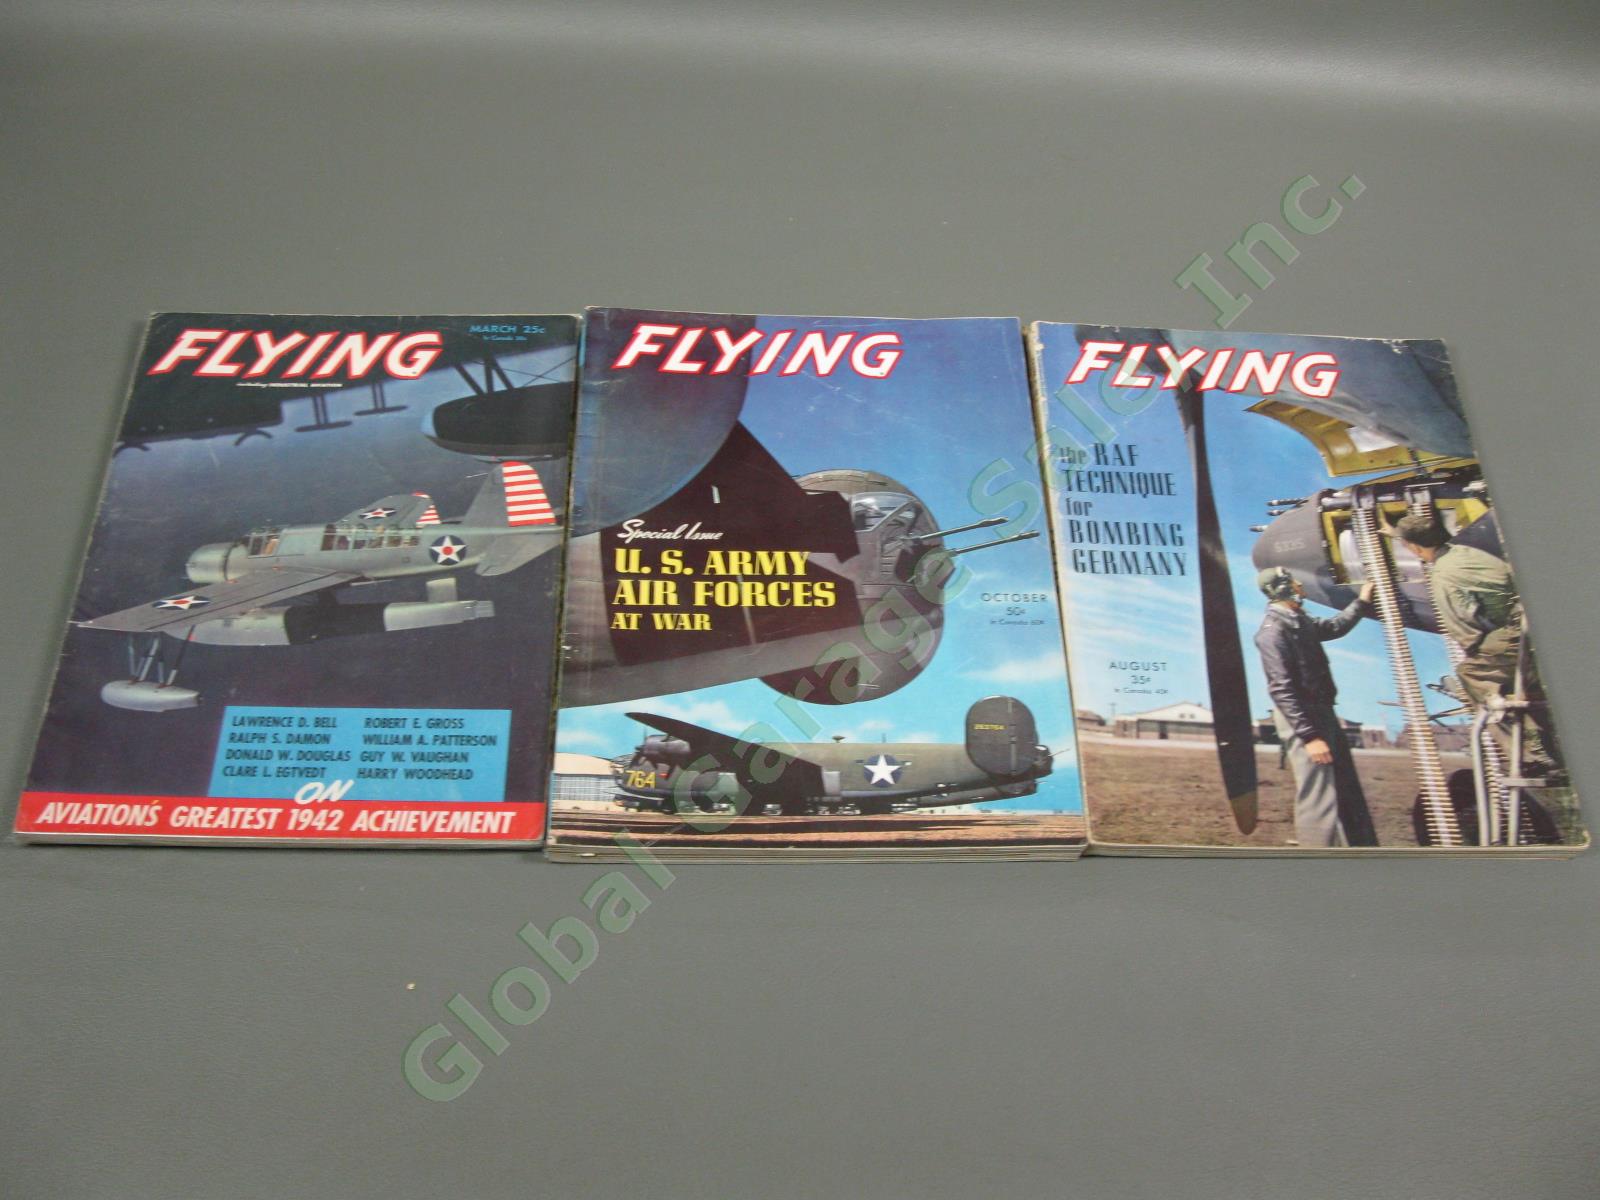 13 Vintage 1942 1943 Flying Magazine WWII Military Aviation WWW Collection Set 3